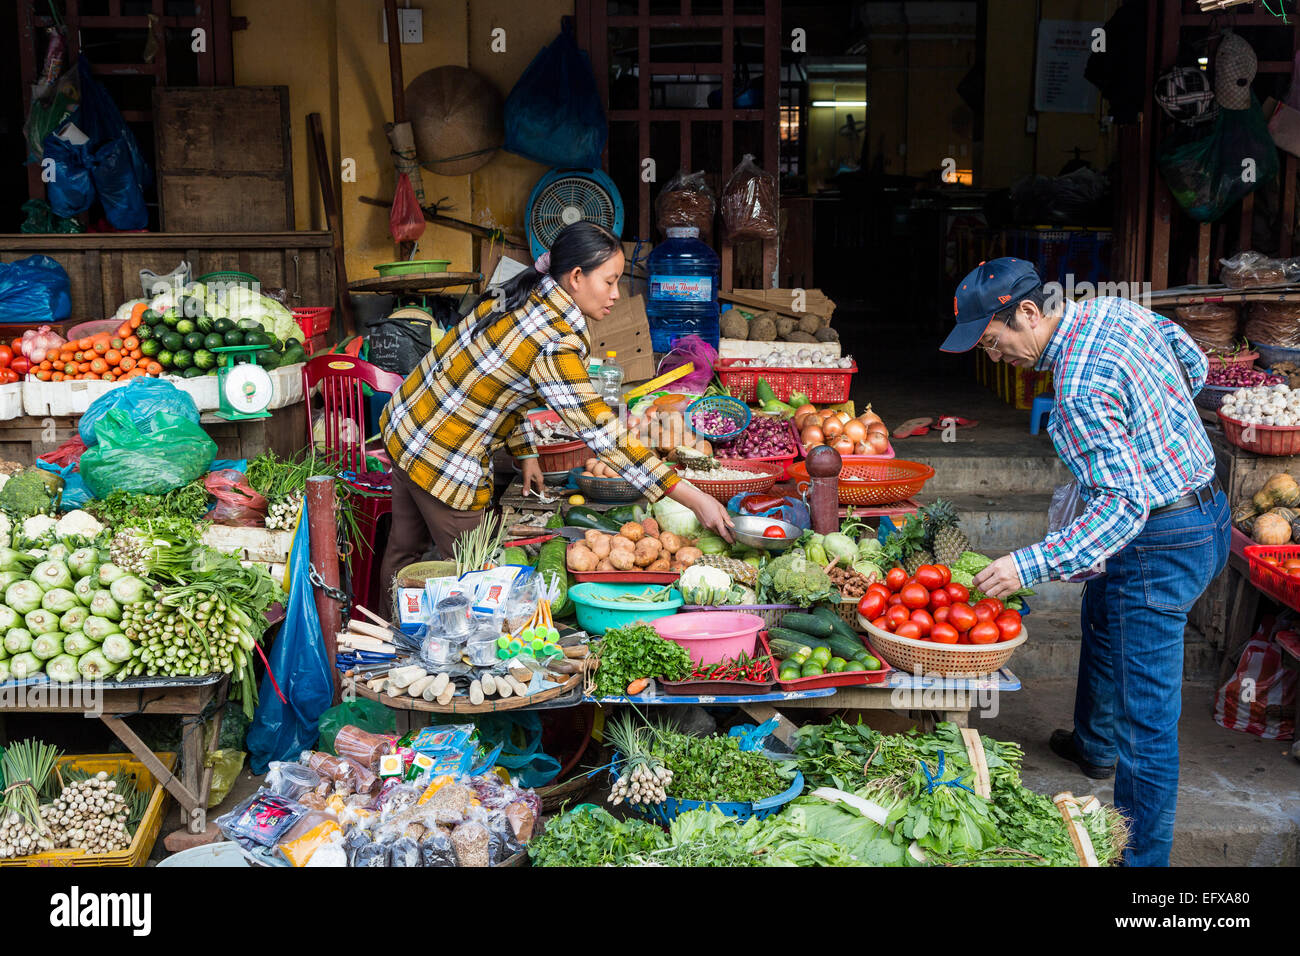 Fruits and vegetables vendors at the Central Market, Hoi An, Vietnam. Stock Photo